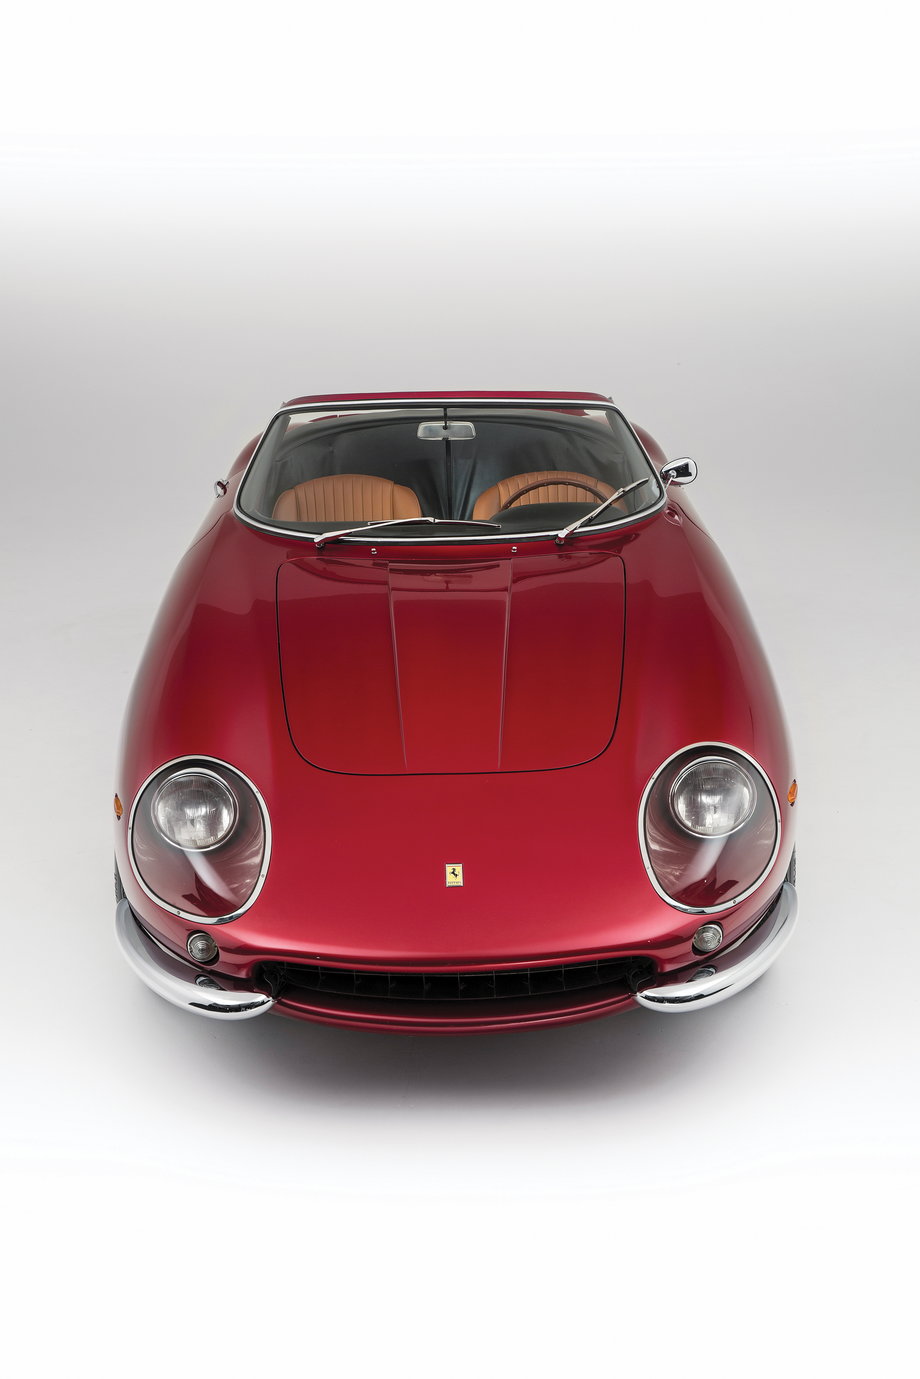 Why that much? Well, it's from what is usually considered the greatest period of Ferrari road and race cars ...